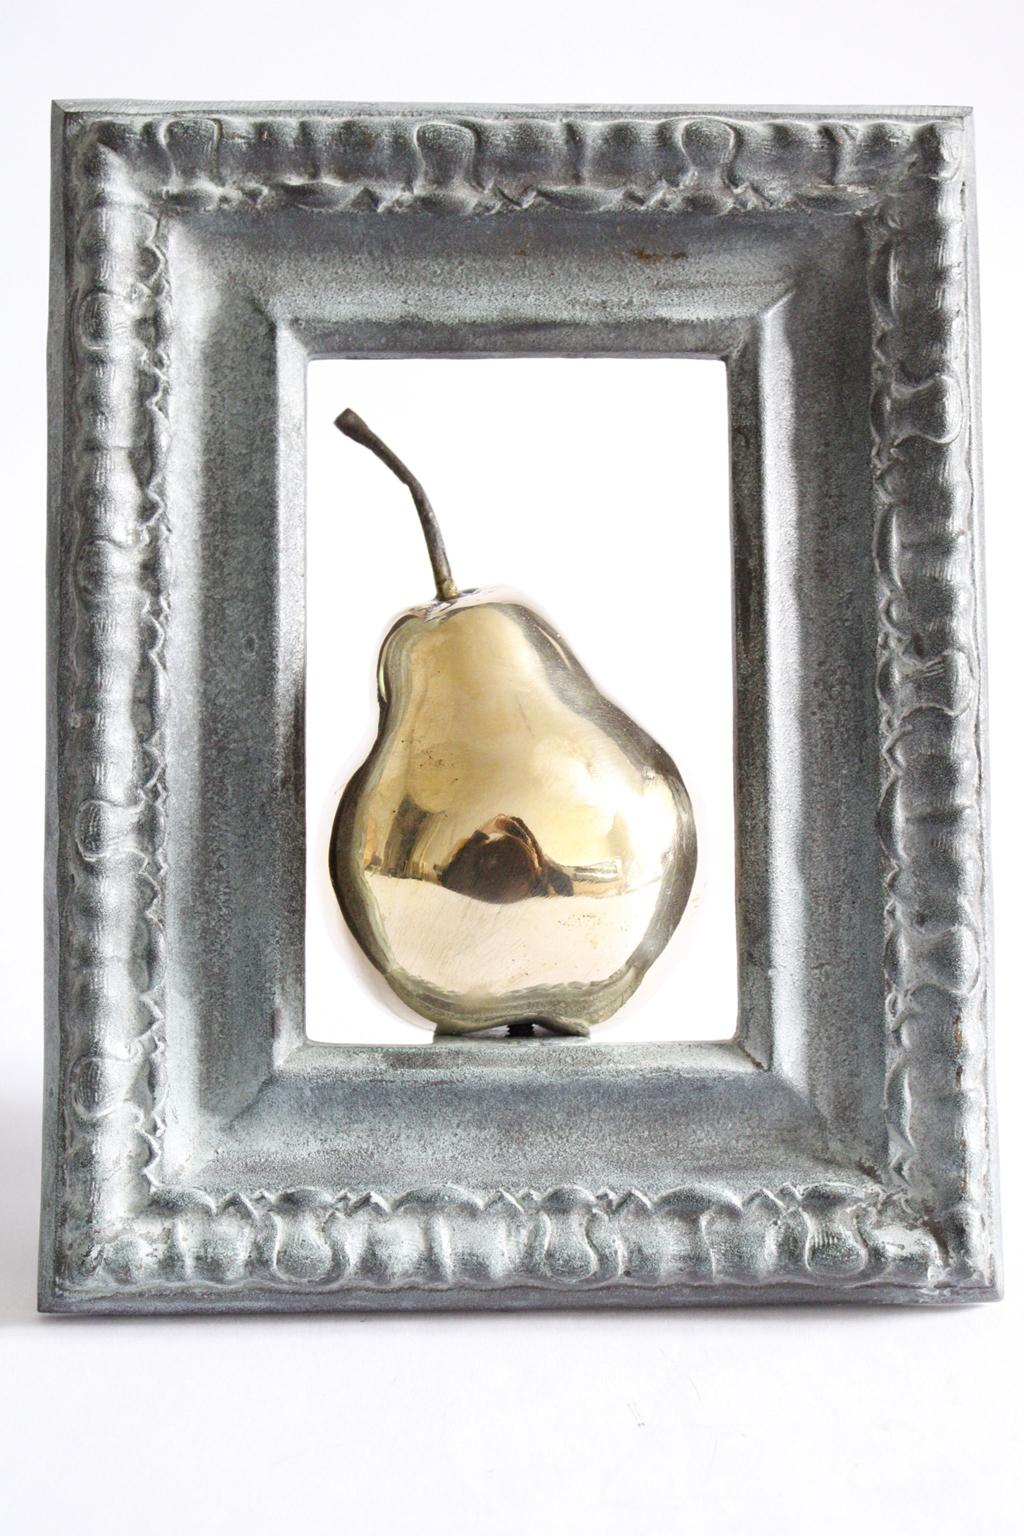 This is a joyful bronze sculpture multiple art work signed by the well known Italian artist Concetto Pozzati. Title Pear (O'pera)

This is a multiple of a numbered edition of 1.000 pieces. The pieces were made in 1980 but they can be considered as